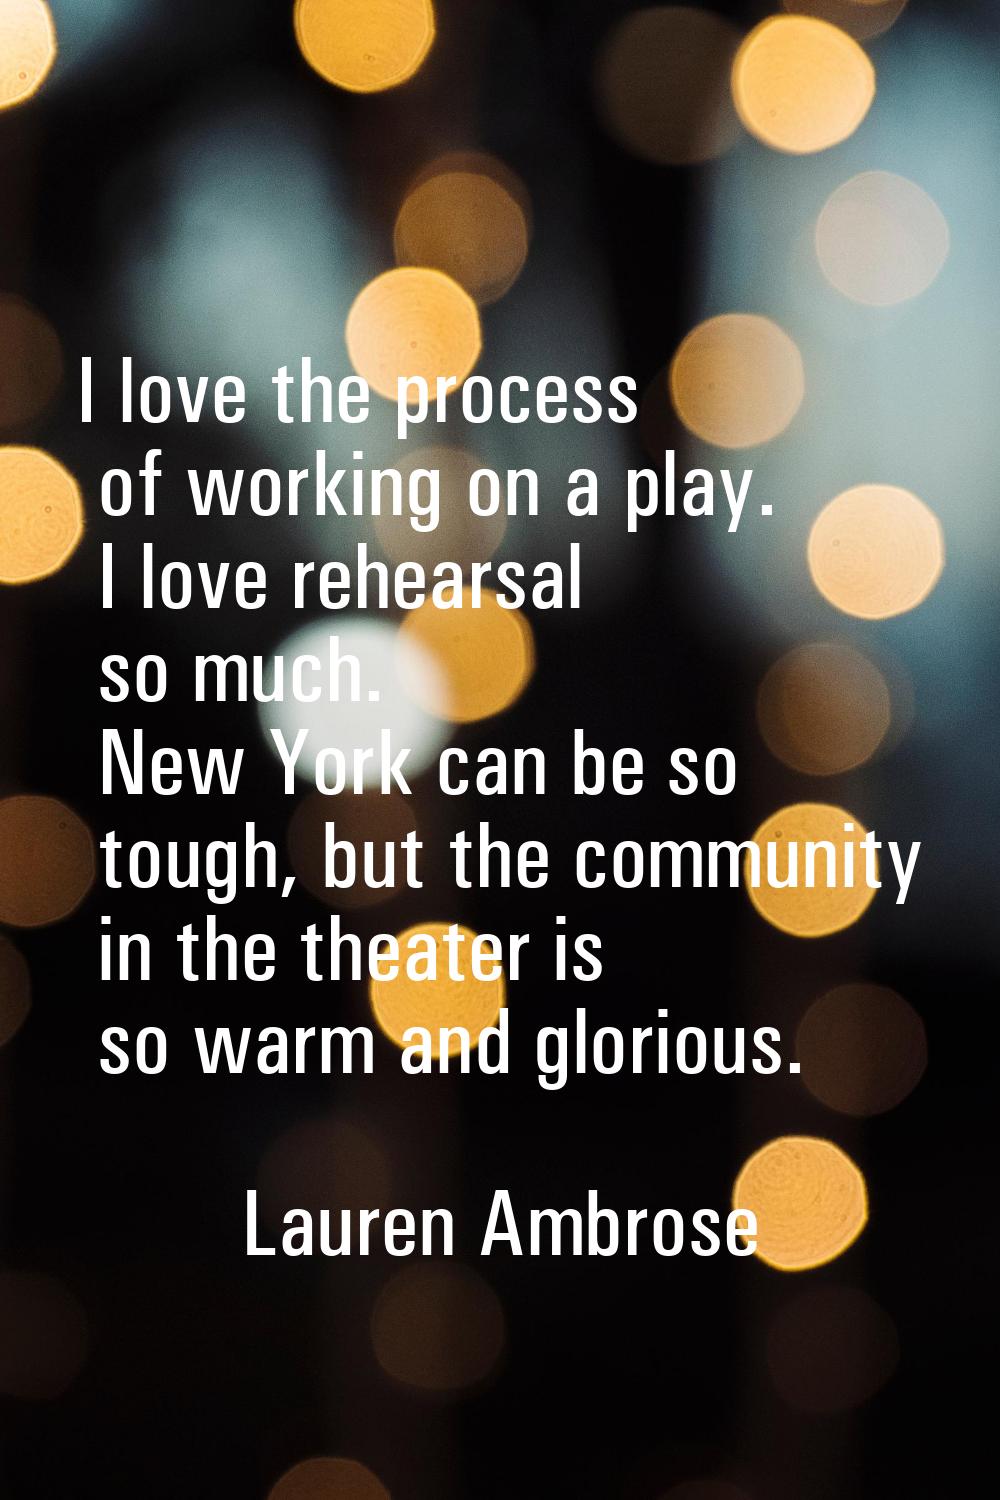 I love the process of working on a play. I love rehearsal so much. New York can be so tough, but th